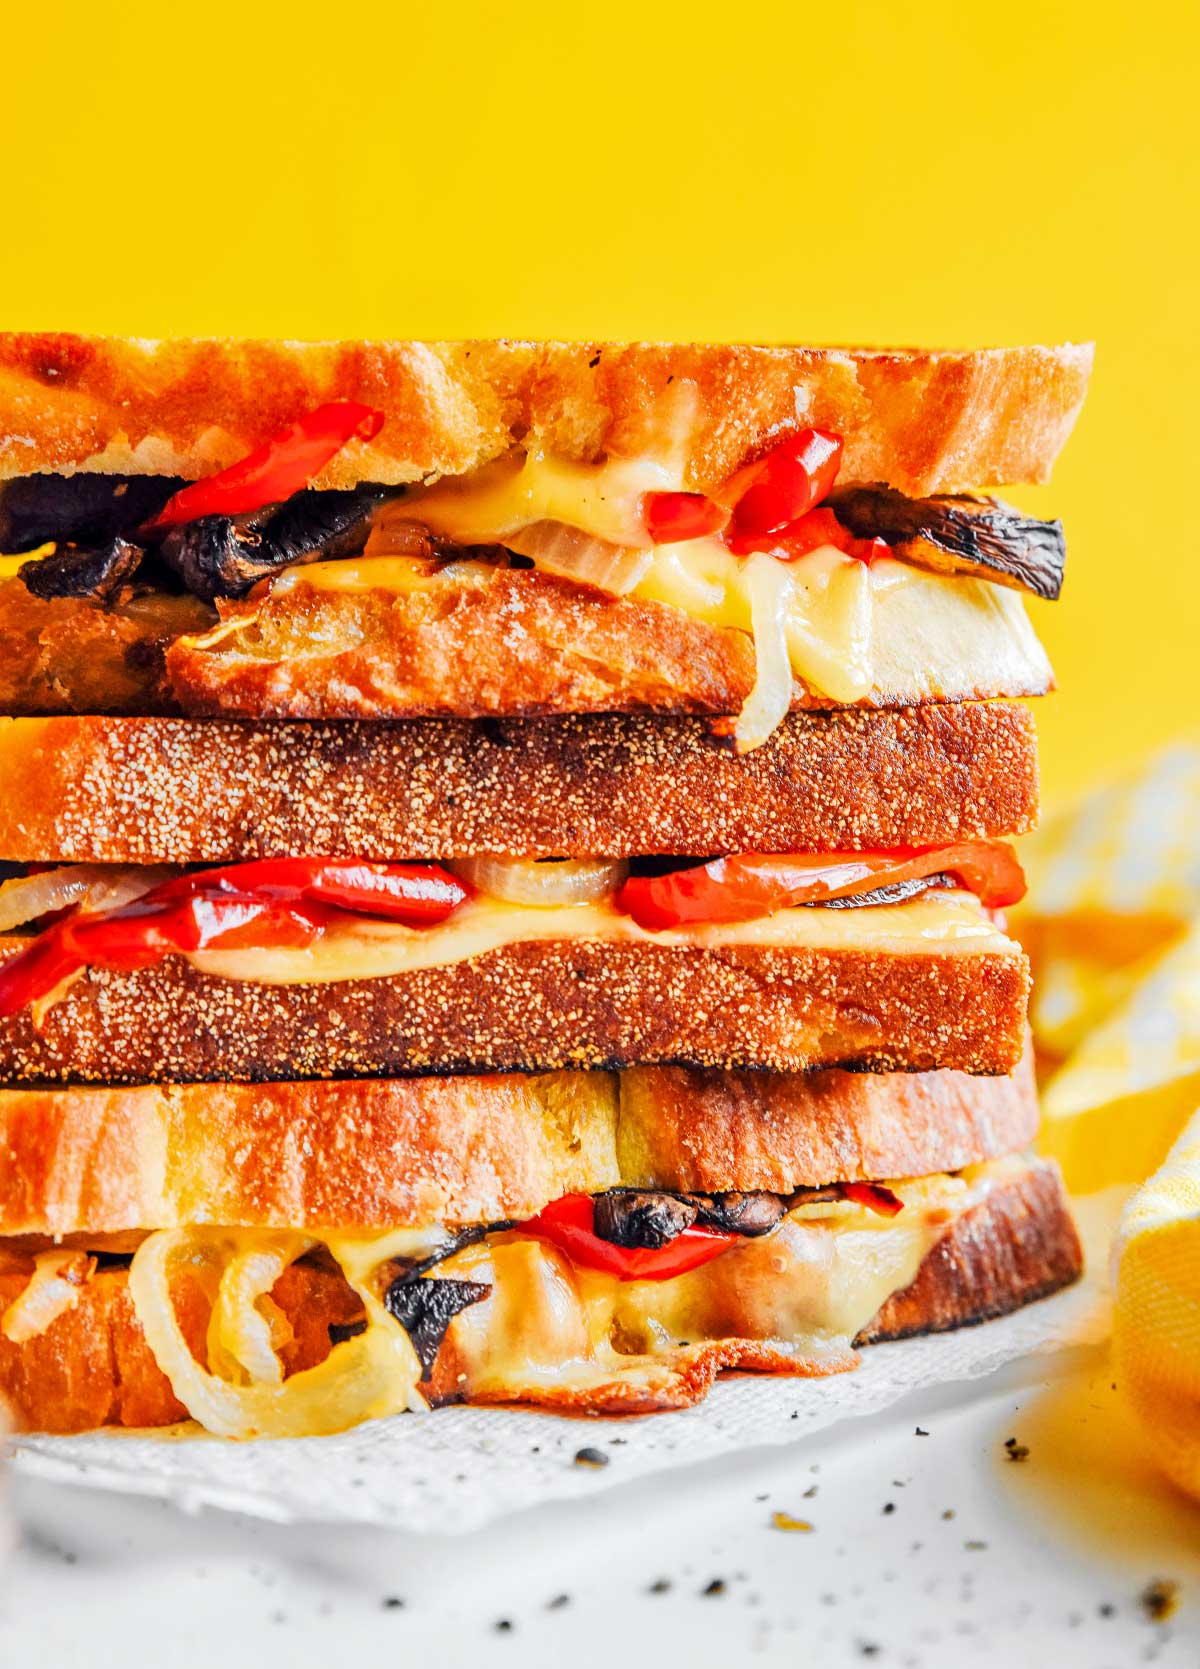 Close up view of 3 stacked roasted vegetable grilled cheeses displaying the fillings of pepper, onion, mushrooms, and gouda